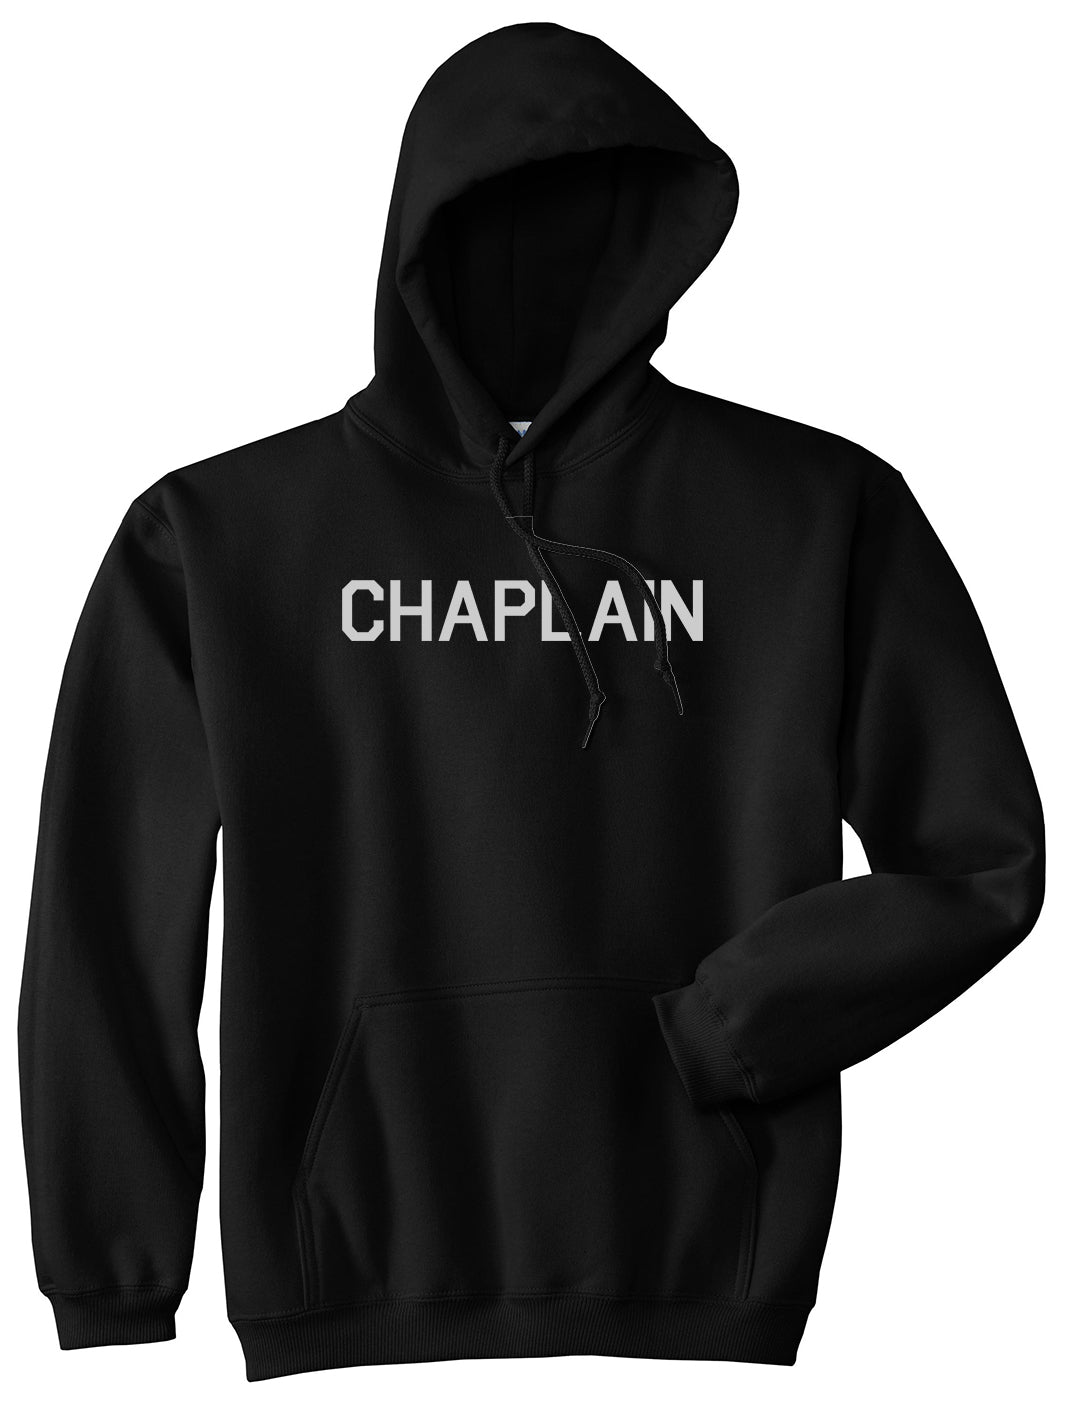 Christian Chaplain Black Pullover Hoodie by Kings Of NY